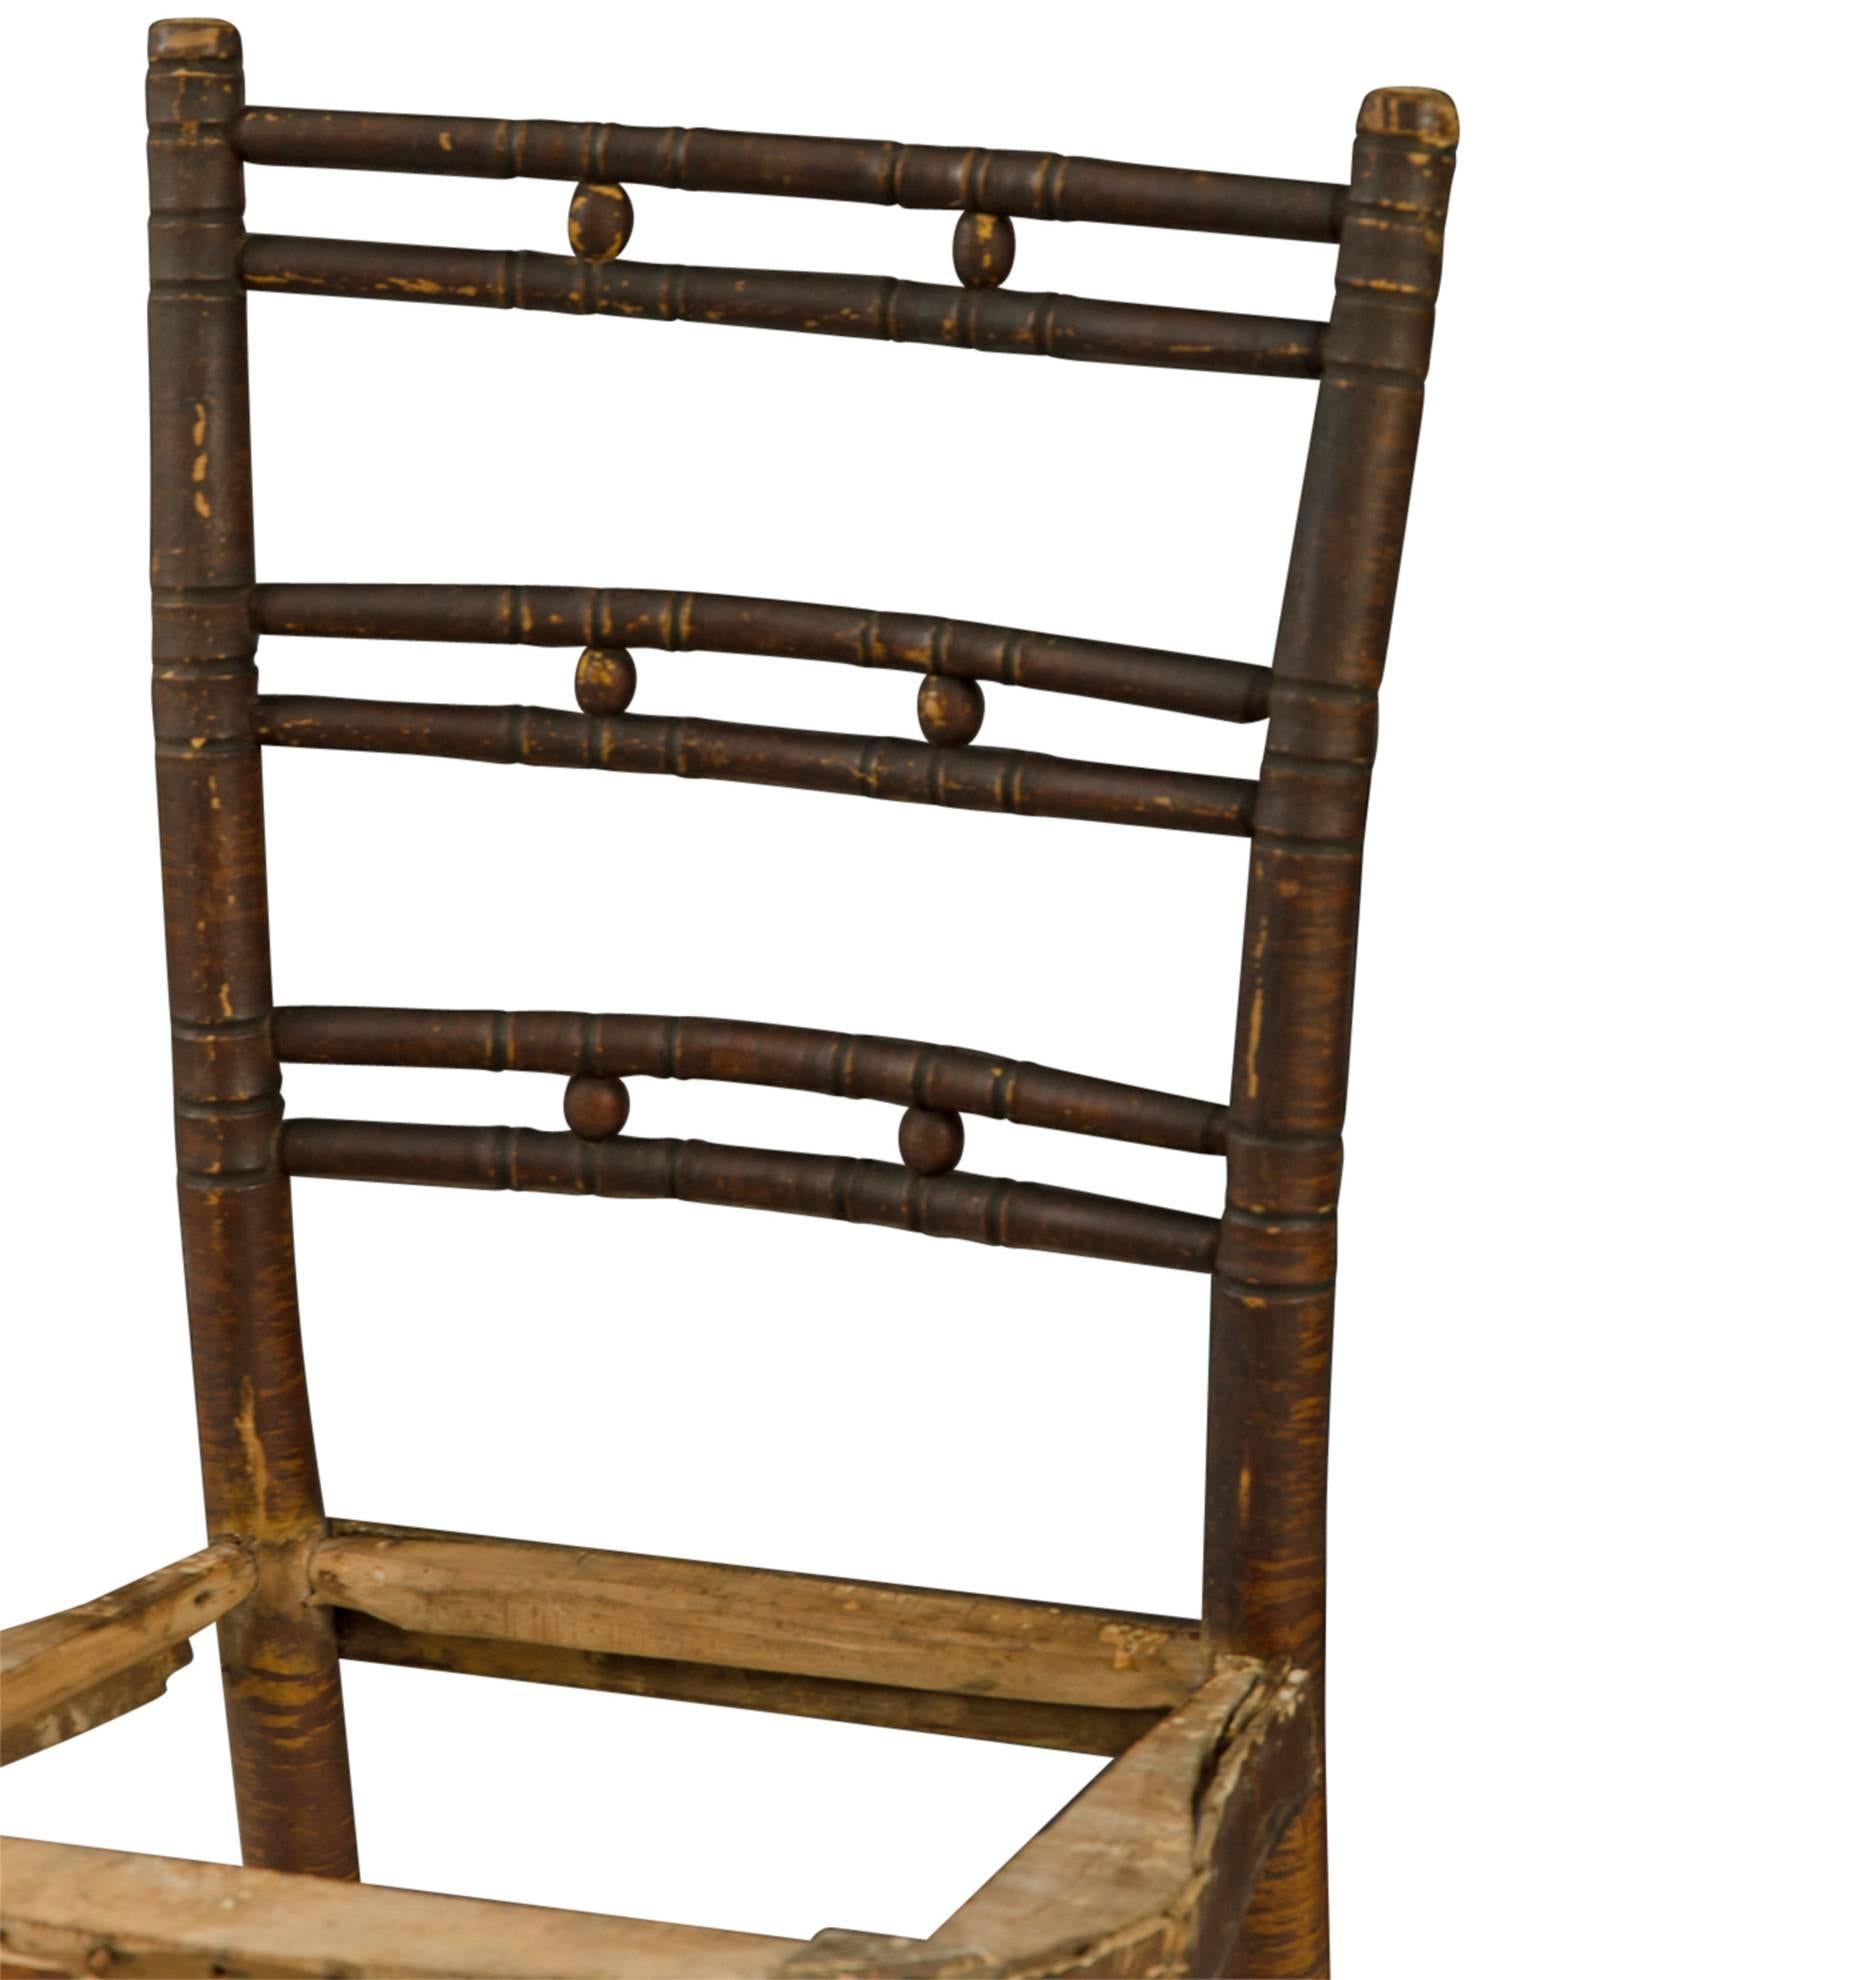 When these chairs were made, America was a young and fiery 30 years old. The burgeoning Republic consisted of only 23 states, and the Missouri and Northwest territories were in dispute. There was not much west of the Mississippi River (no